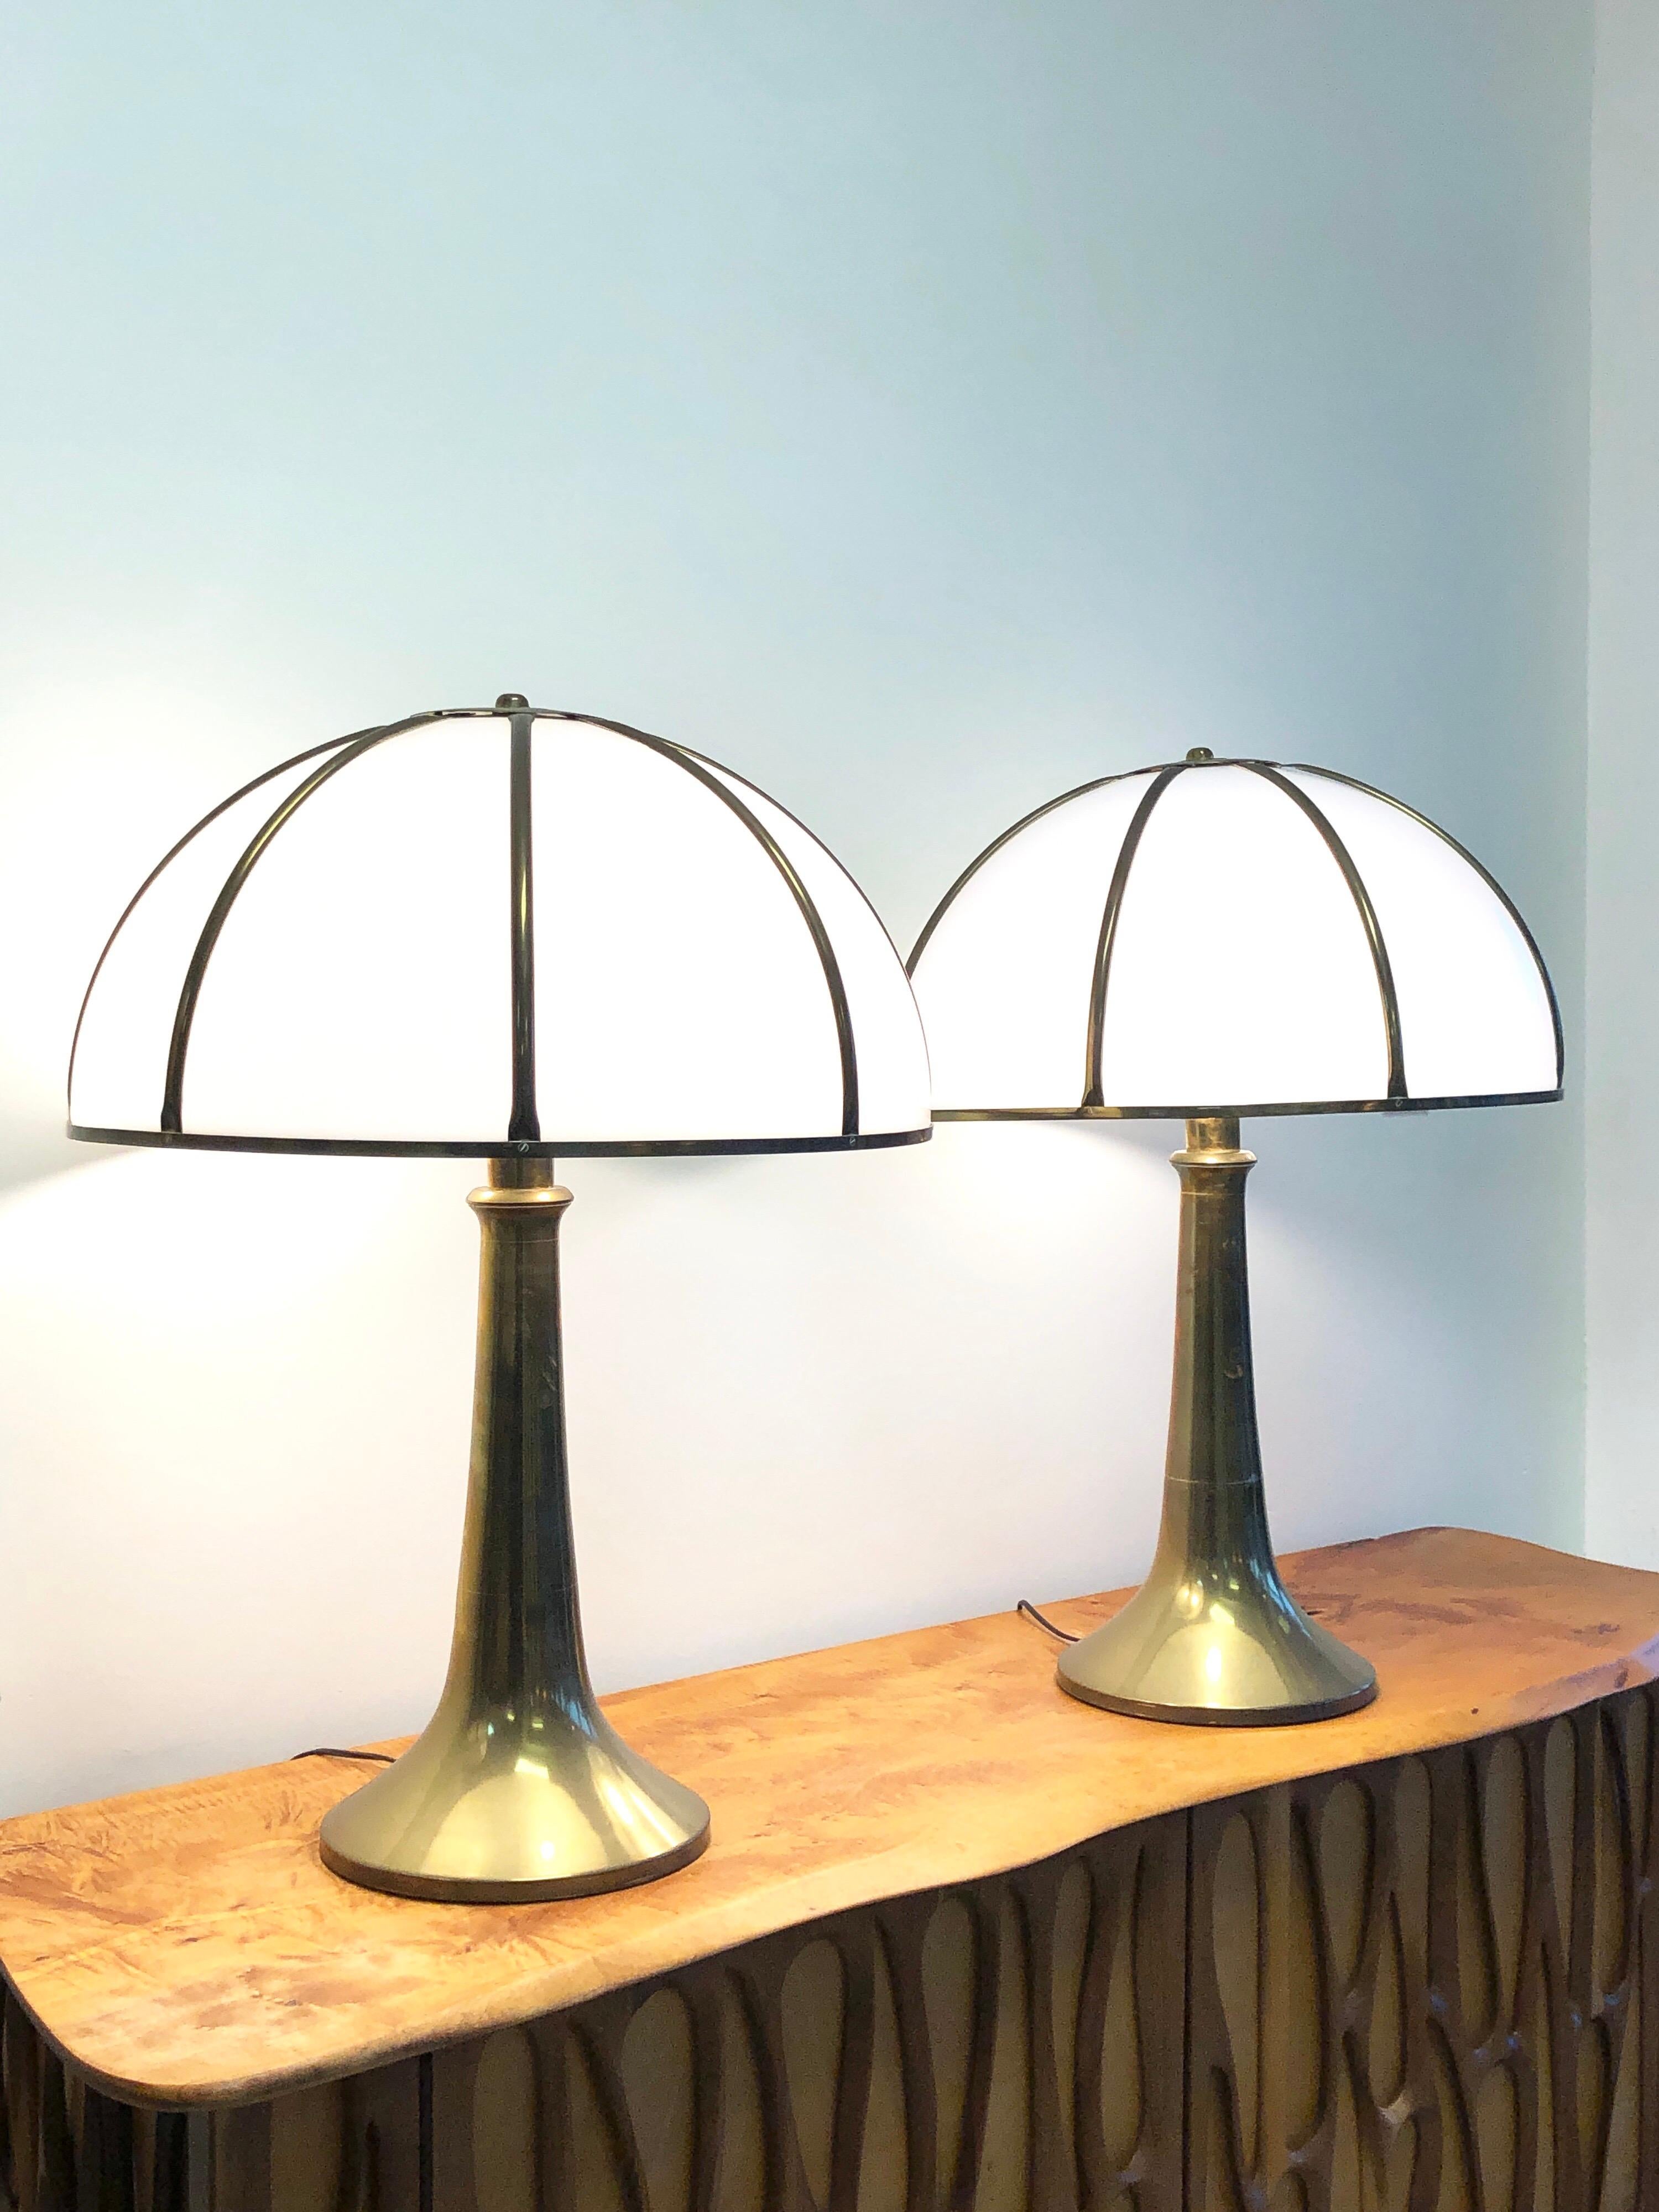 Late 20th Century Gabriella Crespi Pair of Fungo Brass and Plexiglass Table Lamps, 1970